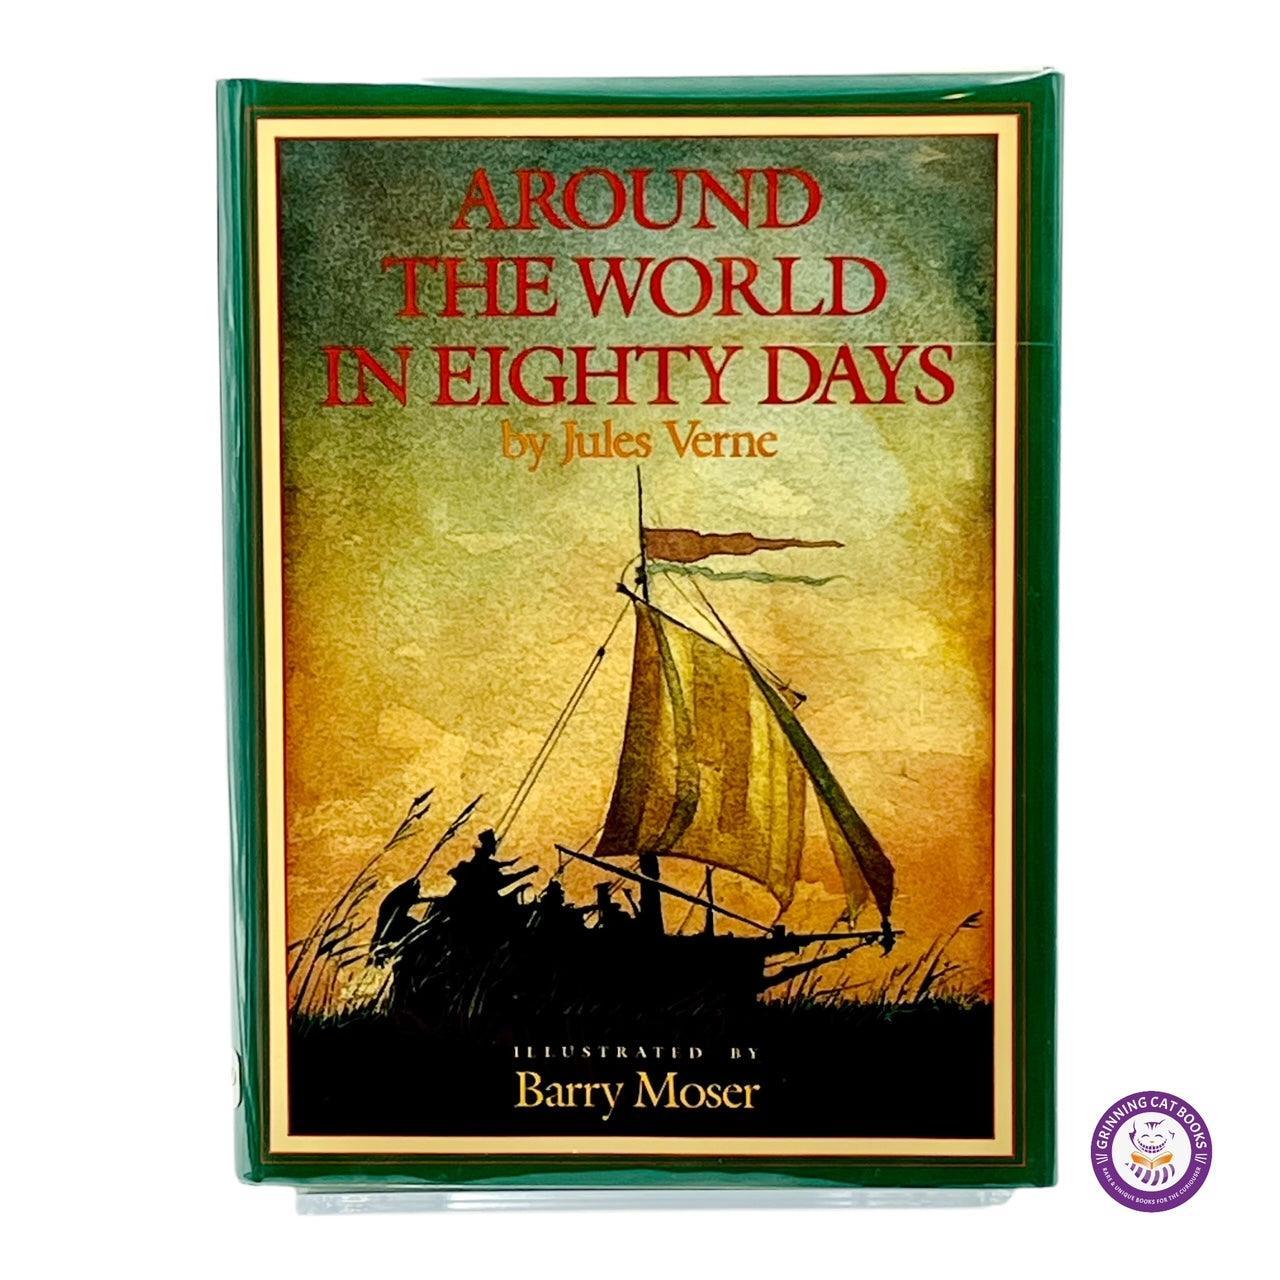 Around the World in Eighty Days (signed by Barry Moser) - Grinning Cat Books - CHILDREN'S LITERATURE - ADVENTURE